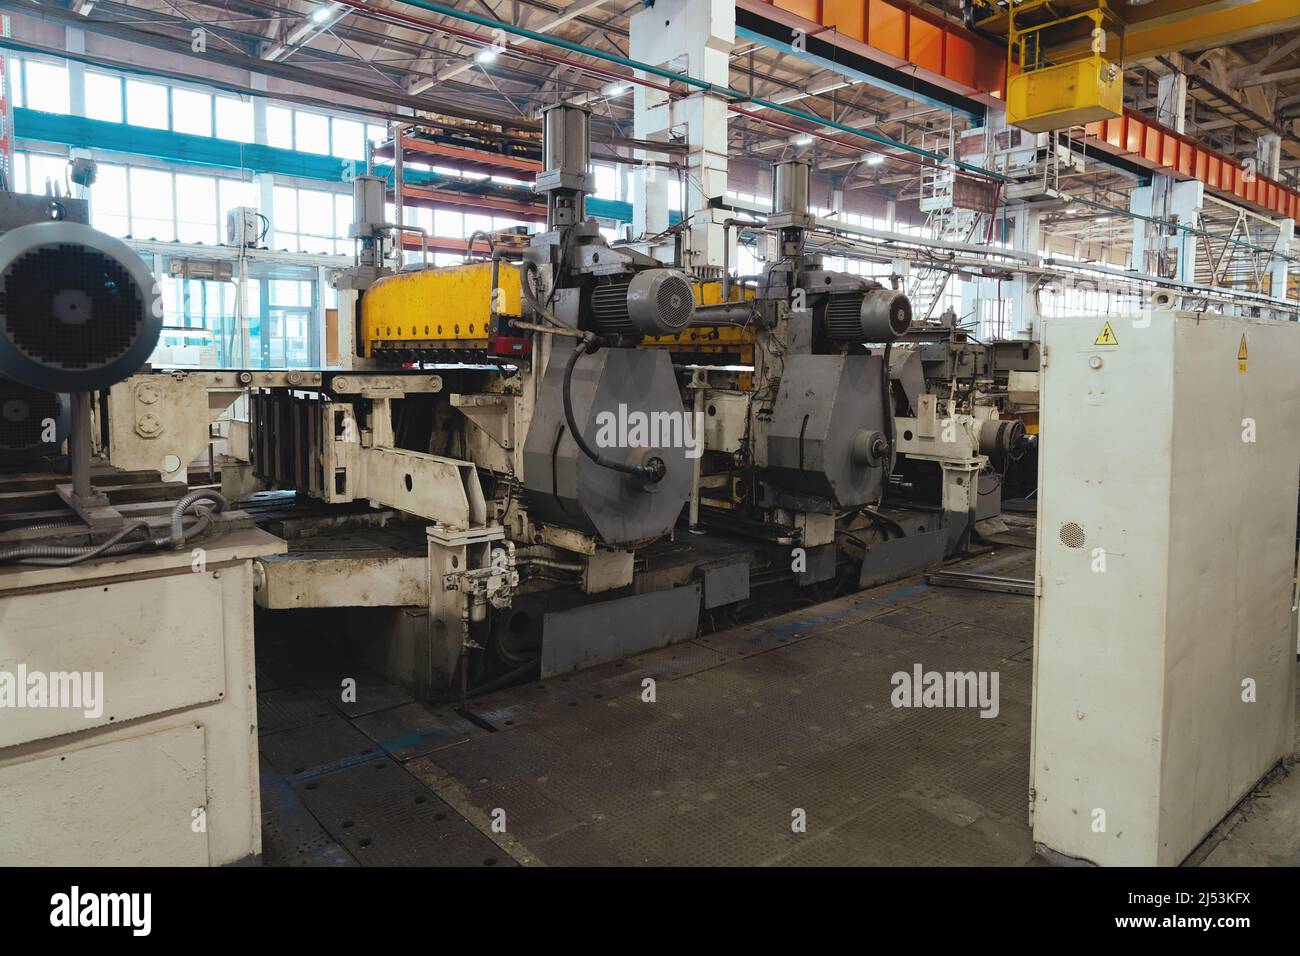 Industrial factory for mechanical engineering. Metalworking factory production line. Equipment and machines. Stock Photo